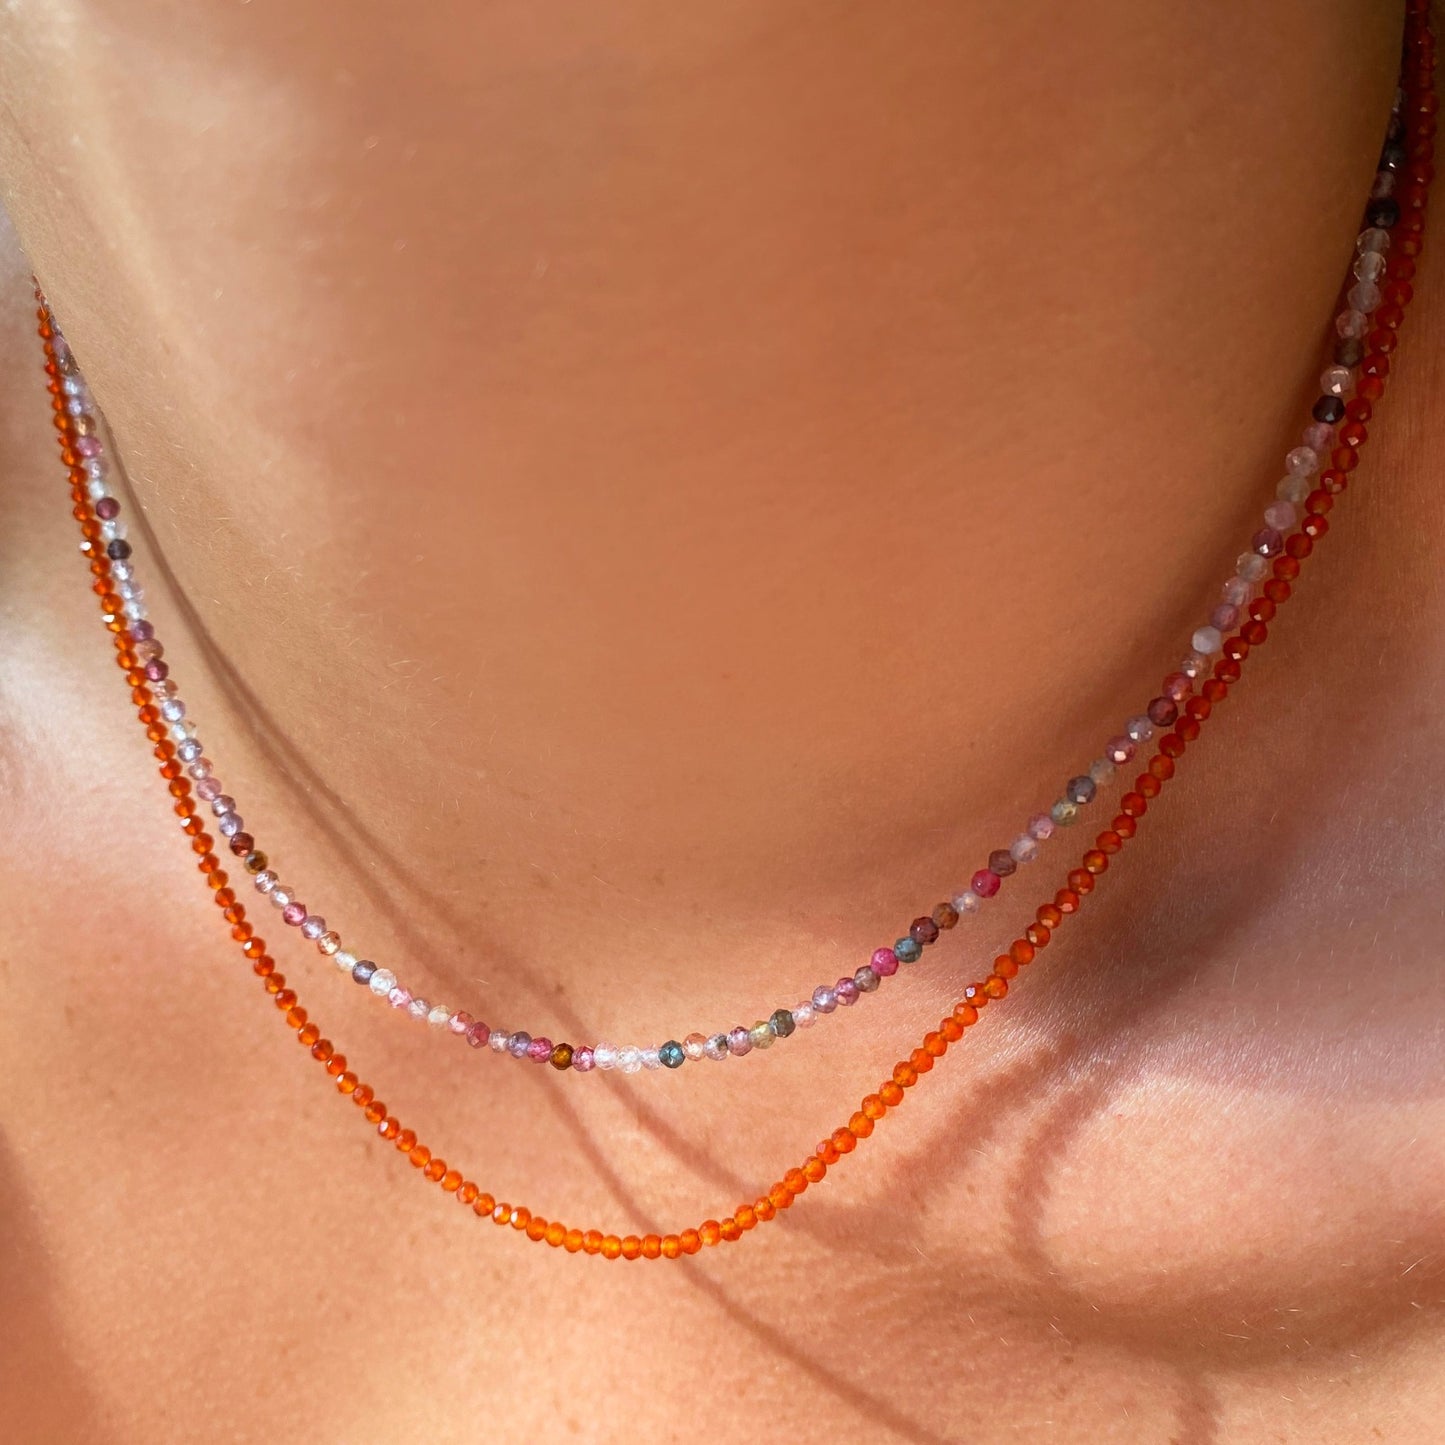 Two shimmering beaded necklaces made of 2mm faceted opals in shades of pink and orange on a gold linking lobster clasp.